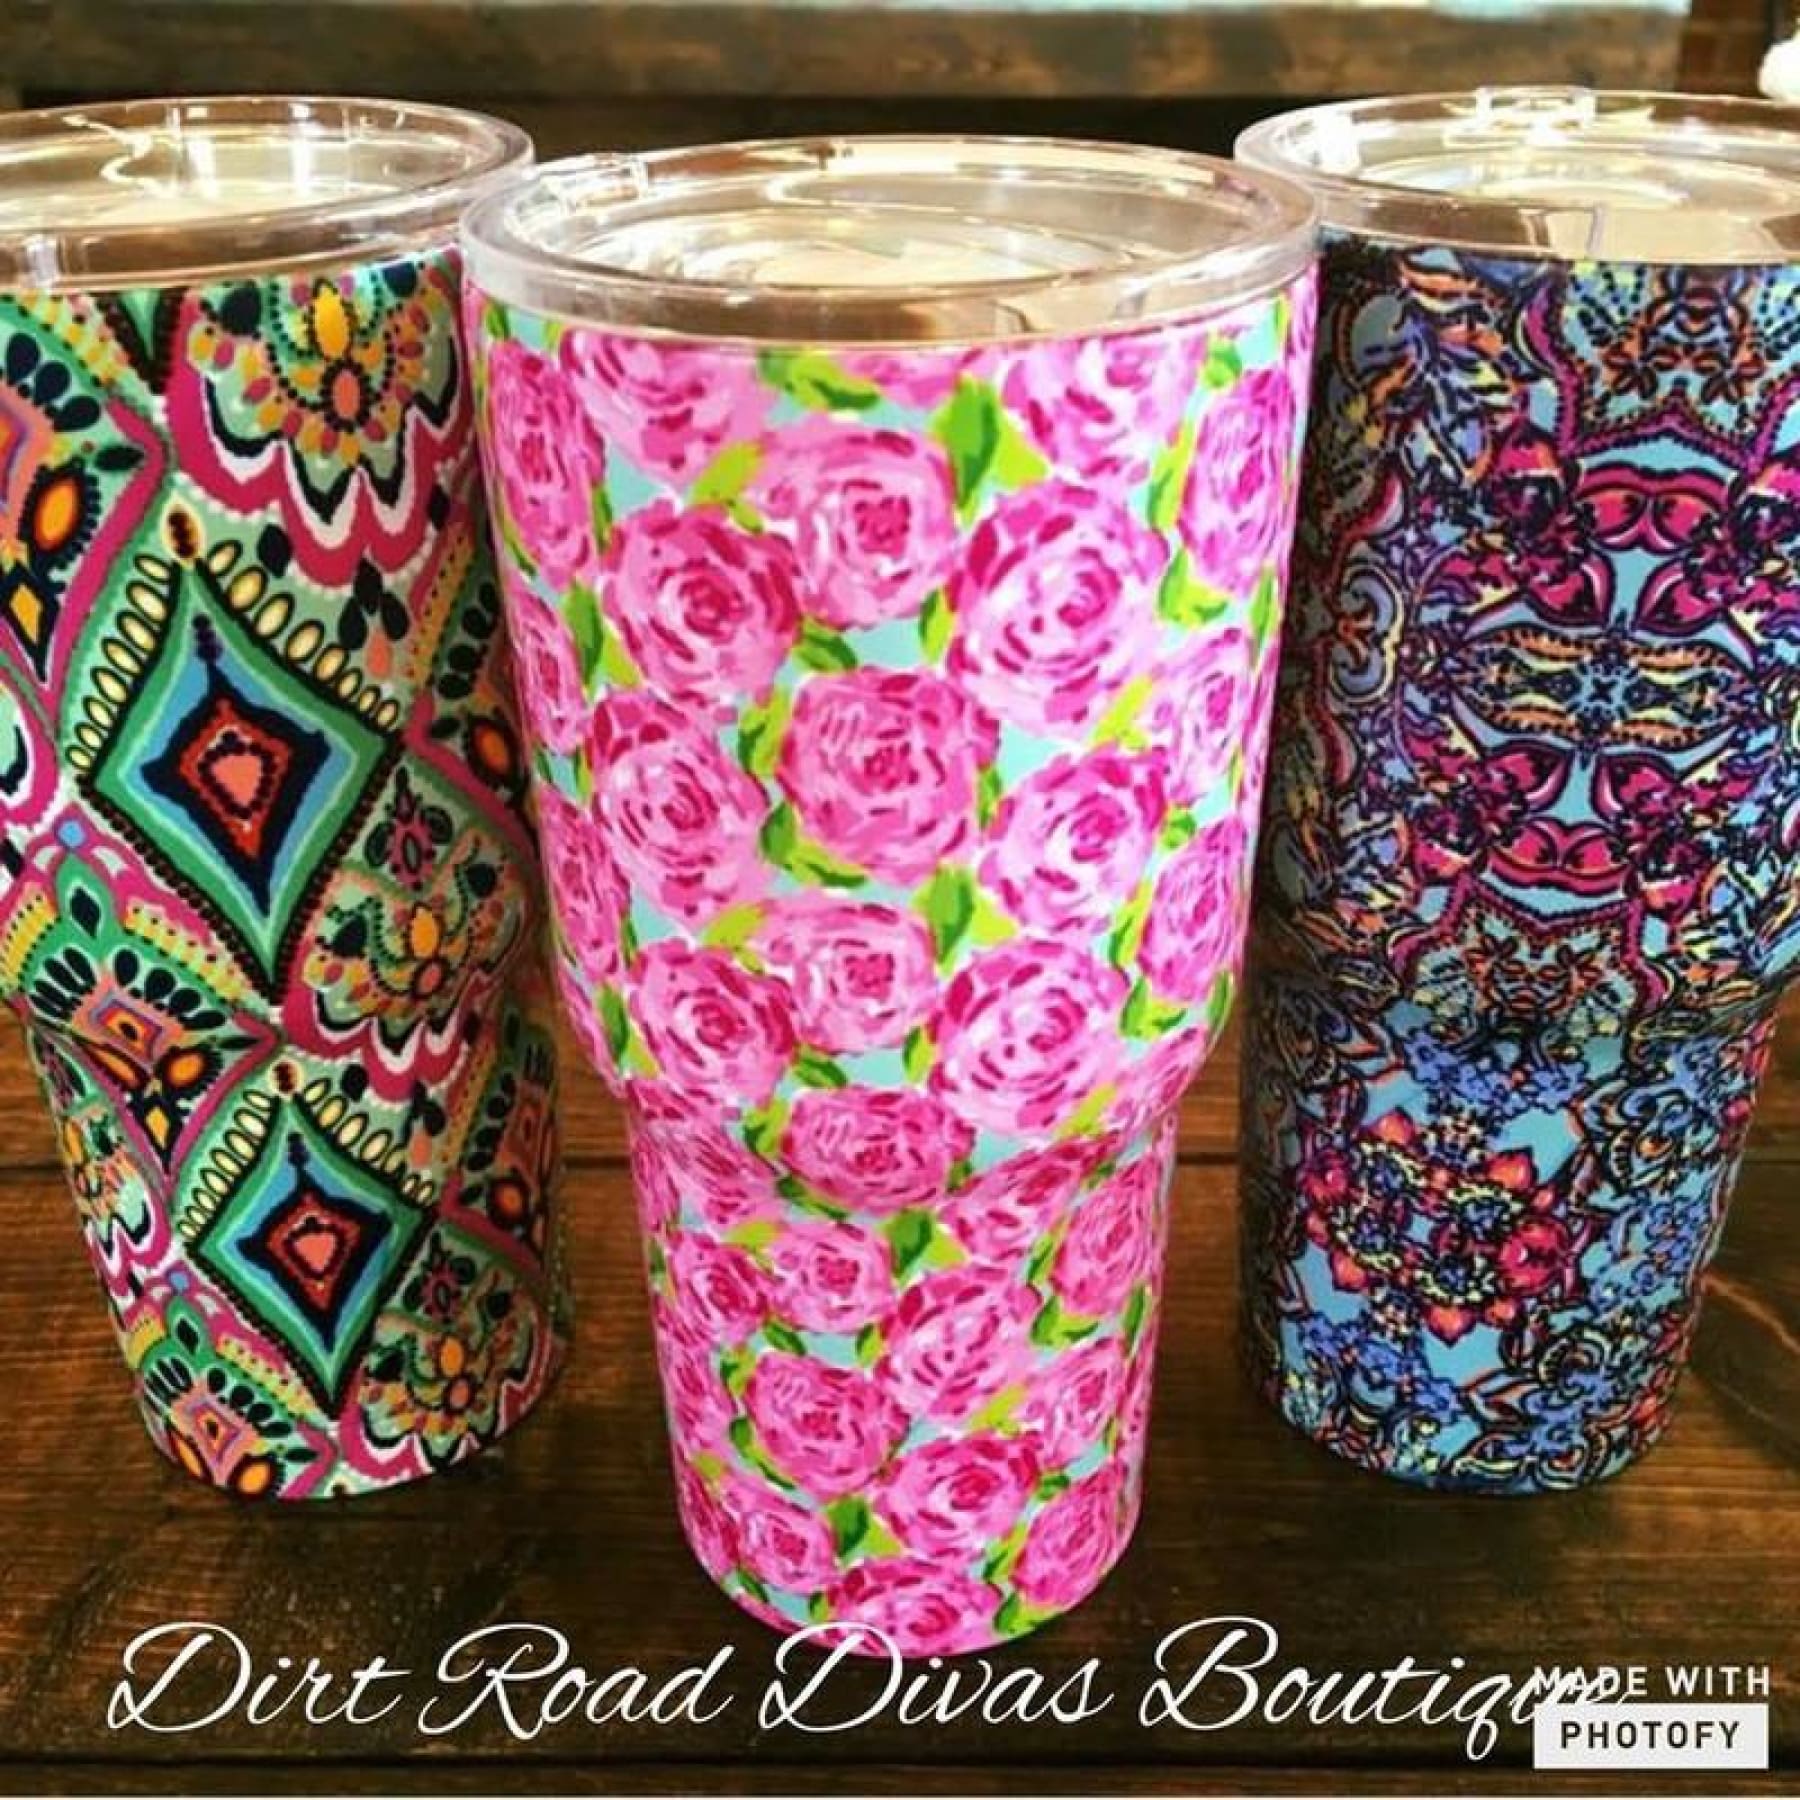 https://cdn.shopify.com/s/files/1/1571/3715/products/designer-inspired-insulated-tumblers-drinkware-home-goods-tumbler-dirt-road-divas-boutique-pink-pattern_179.jpg